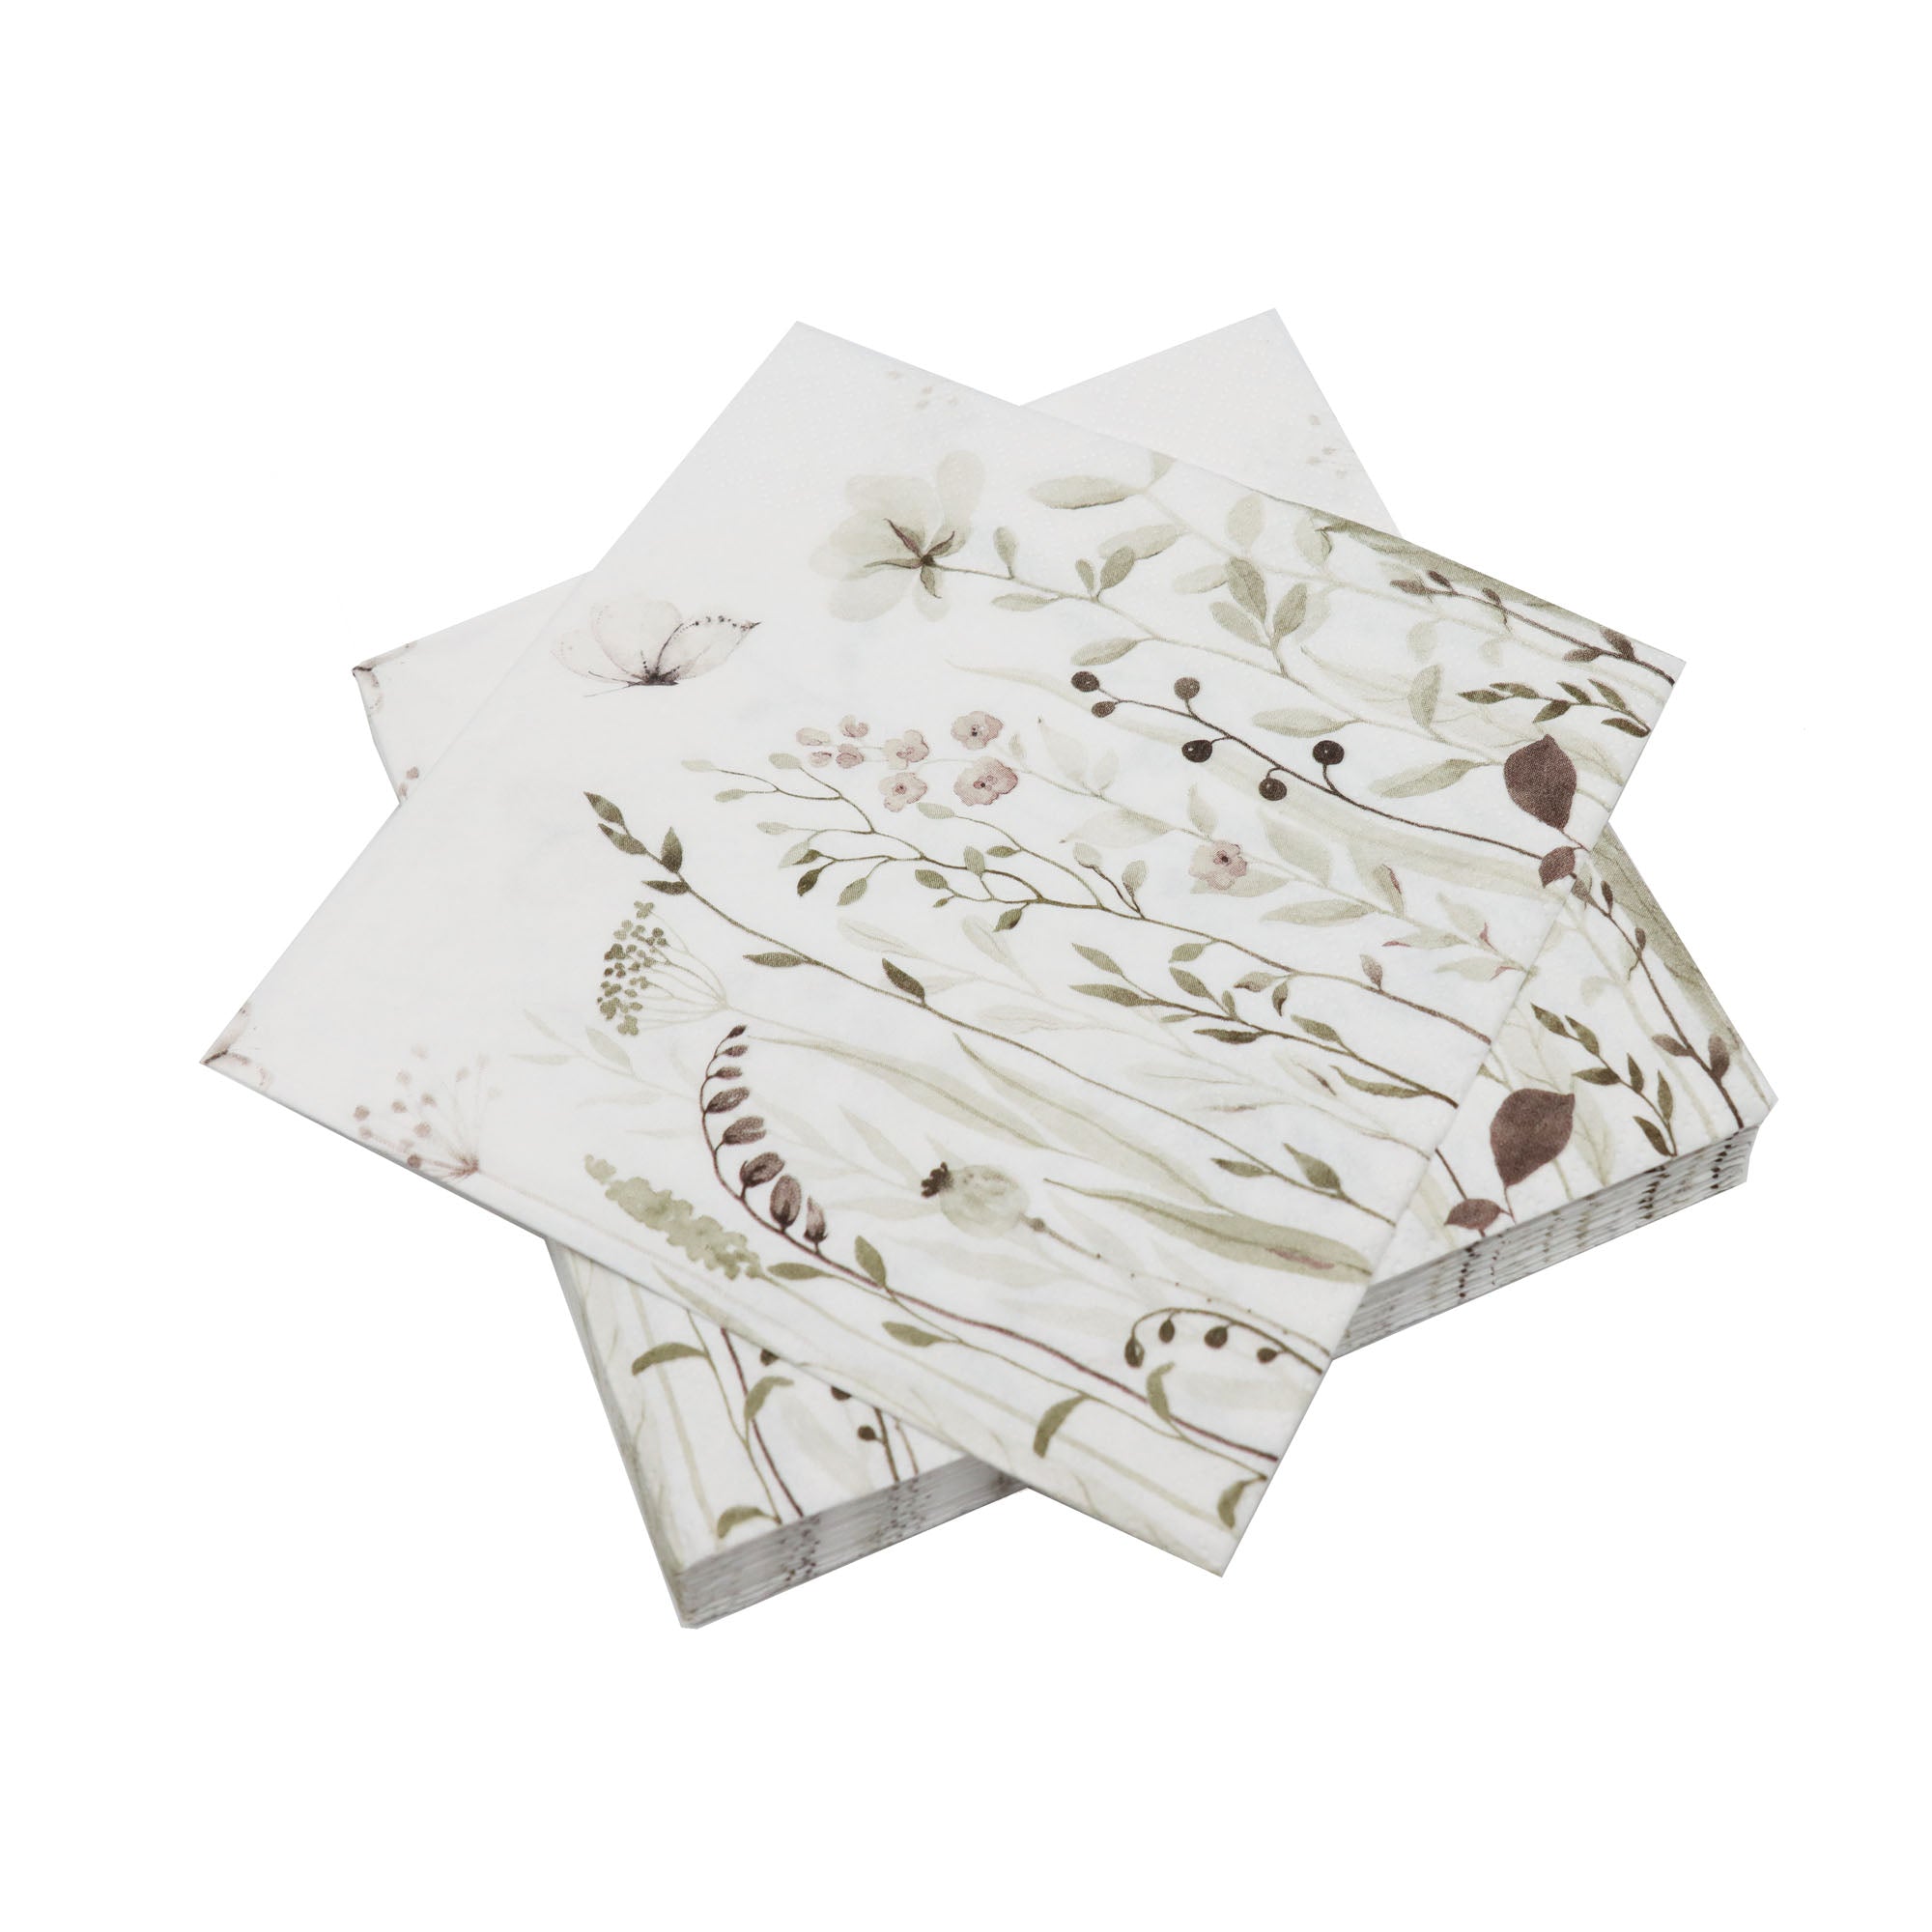 Luncheon Table Paper Serviettes 3ply 33x33cm White Flower 20Pack